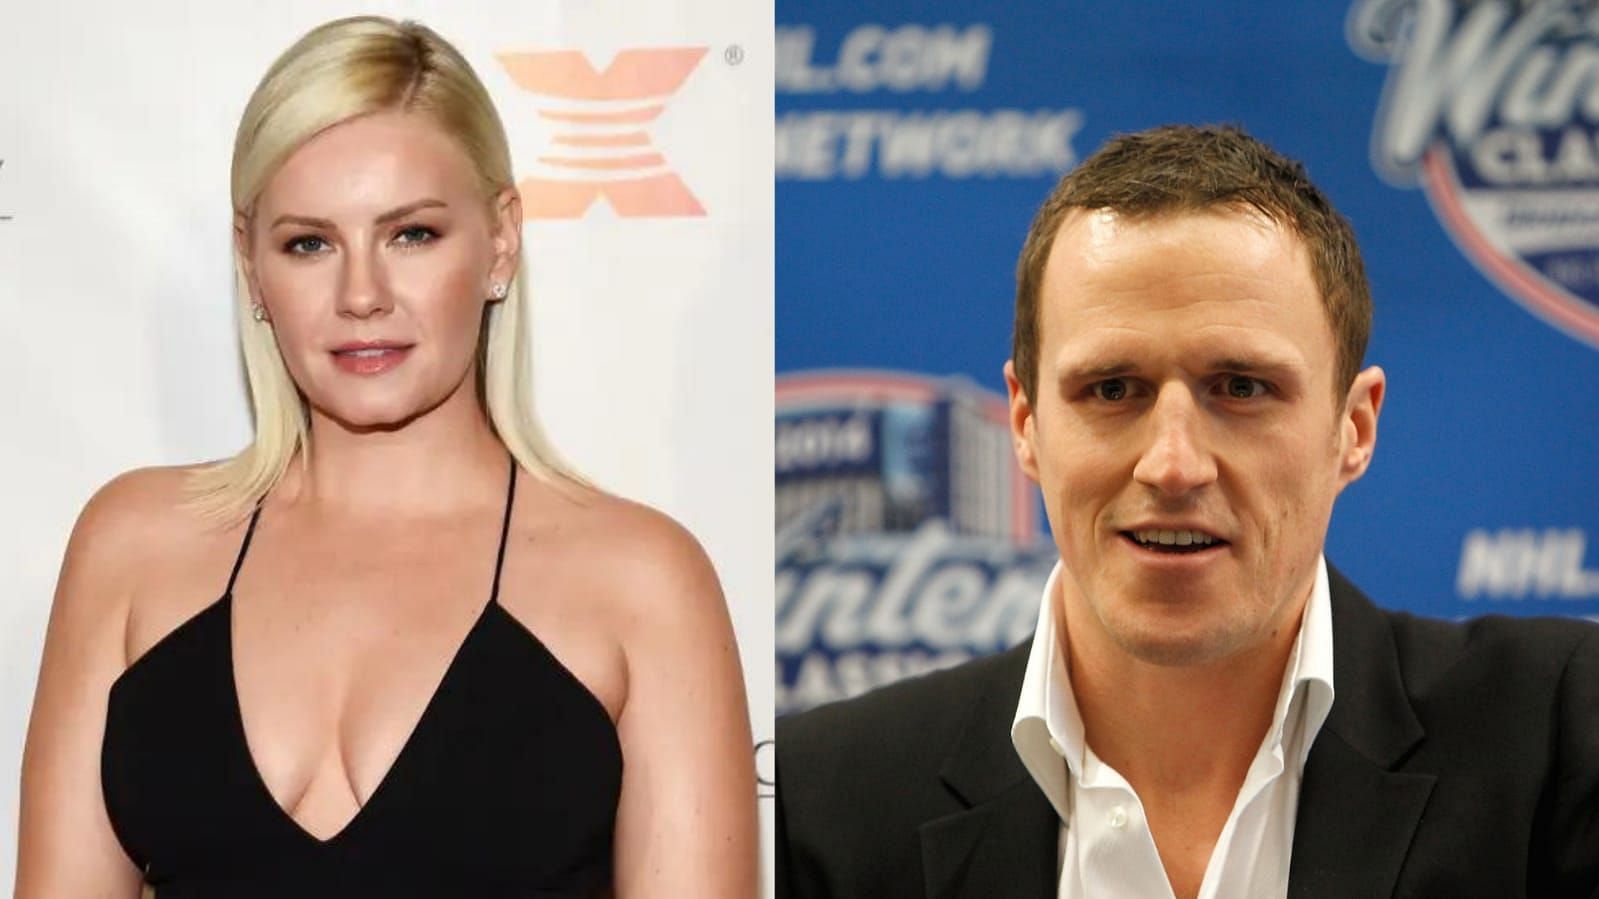 Elisha Cuthbert and her spouse Dion Phaneuf